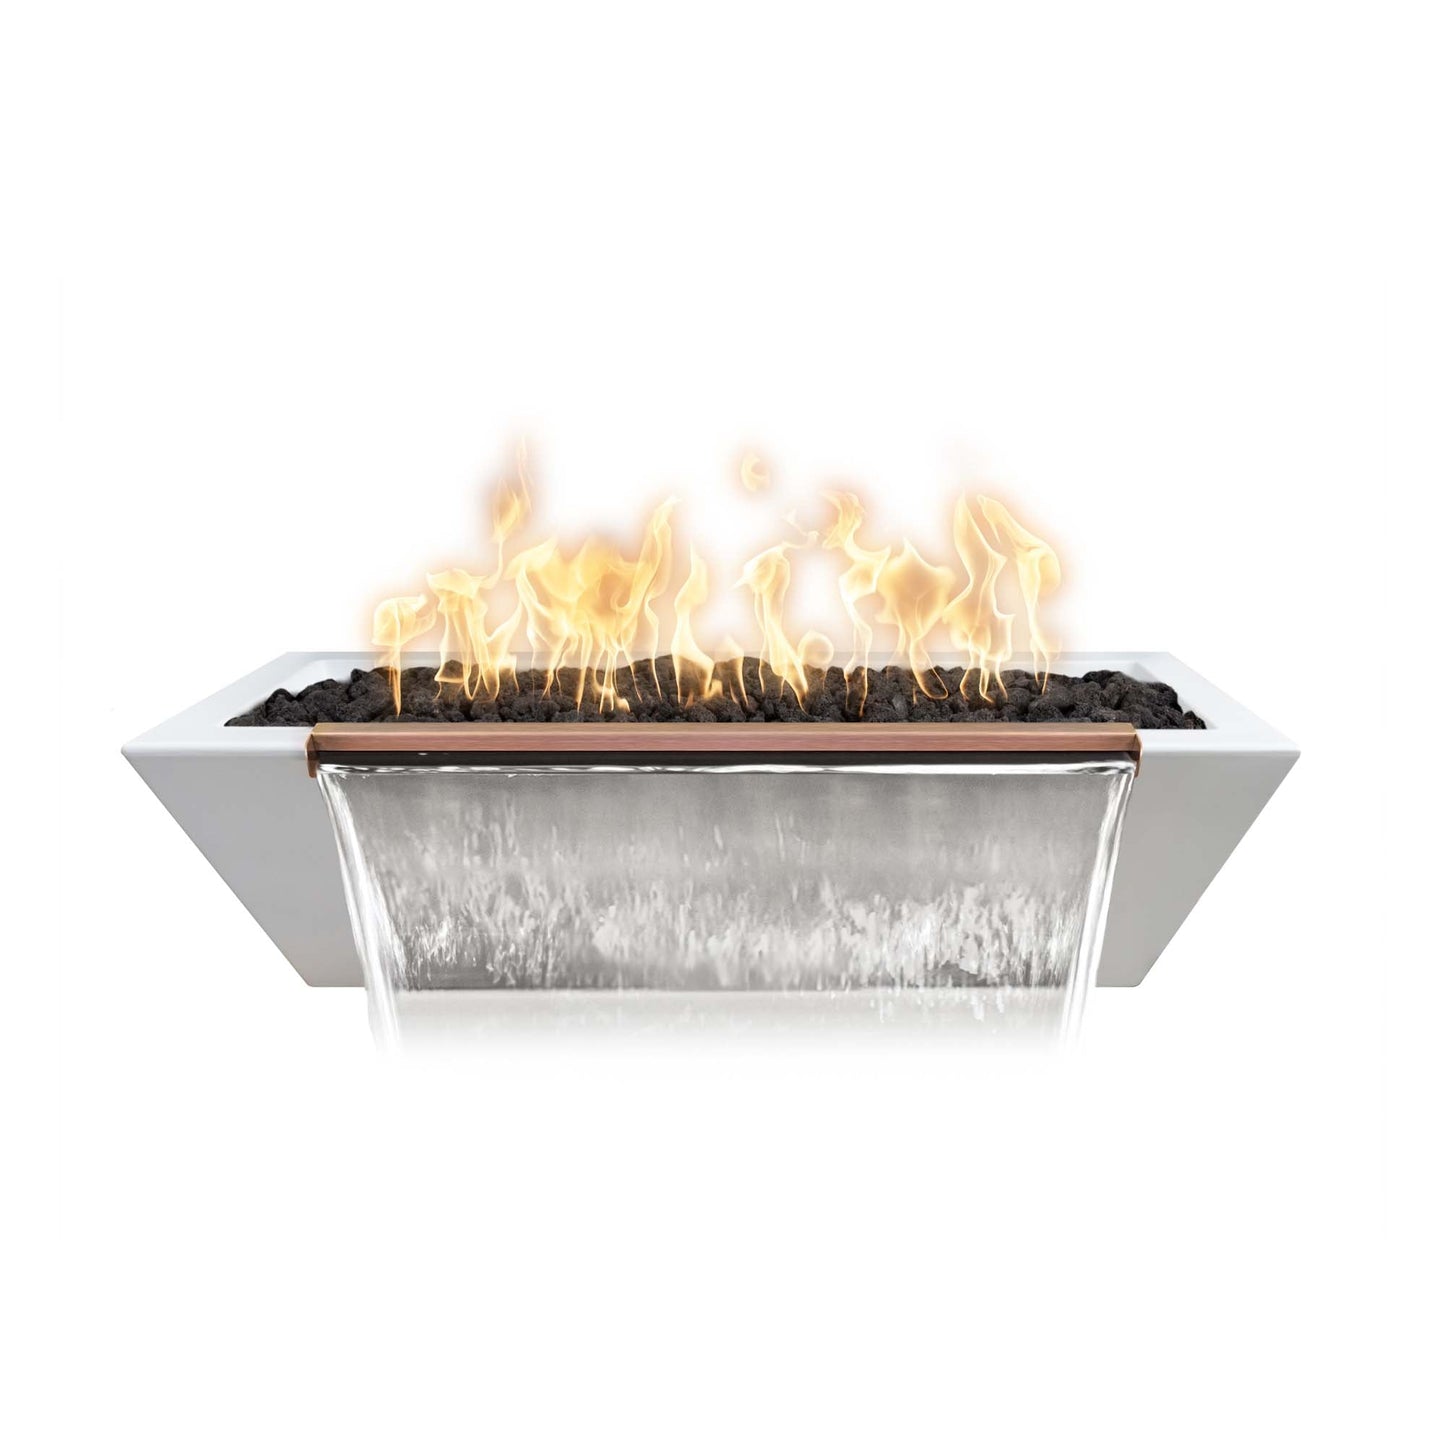 The Outdoor Plus Linear Maya 72" Gray GFRC Concrete Liquid Propane Fire & Water Bowl with 12V Electronic Ignition